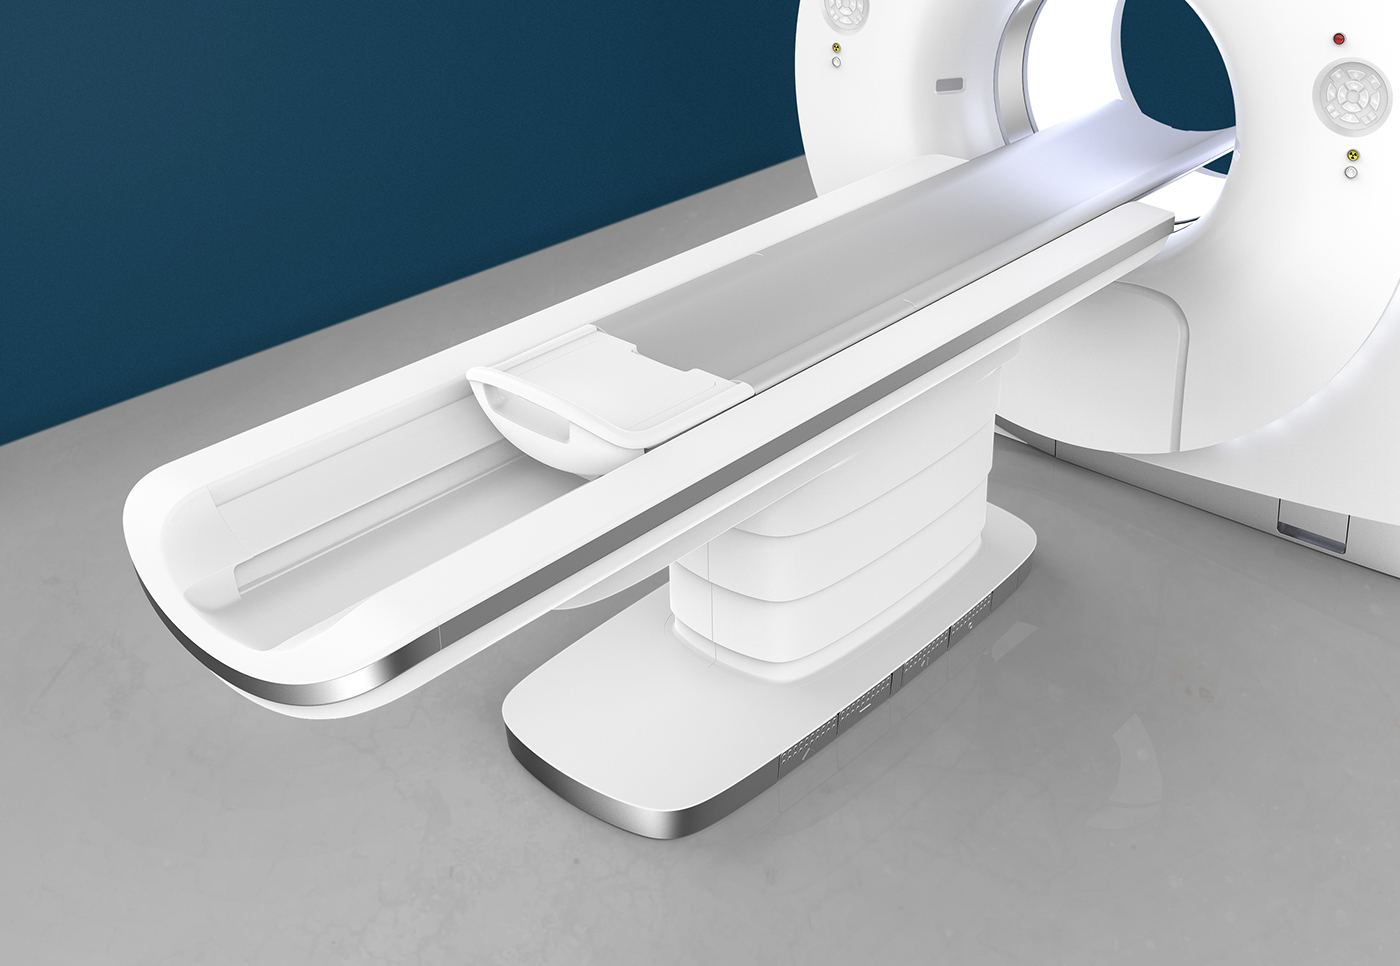 Adobe Portfolio Computed Tomography x-ray medical healthcare ct scanner patient care doctor hospital